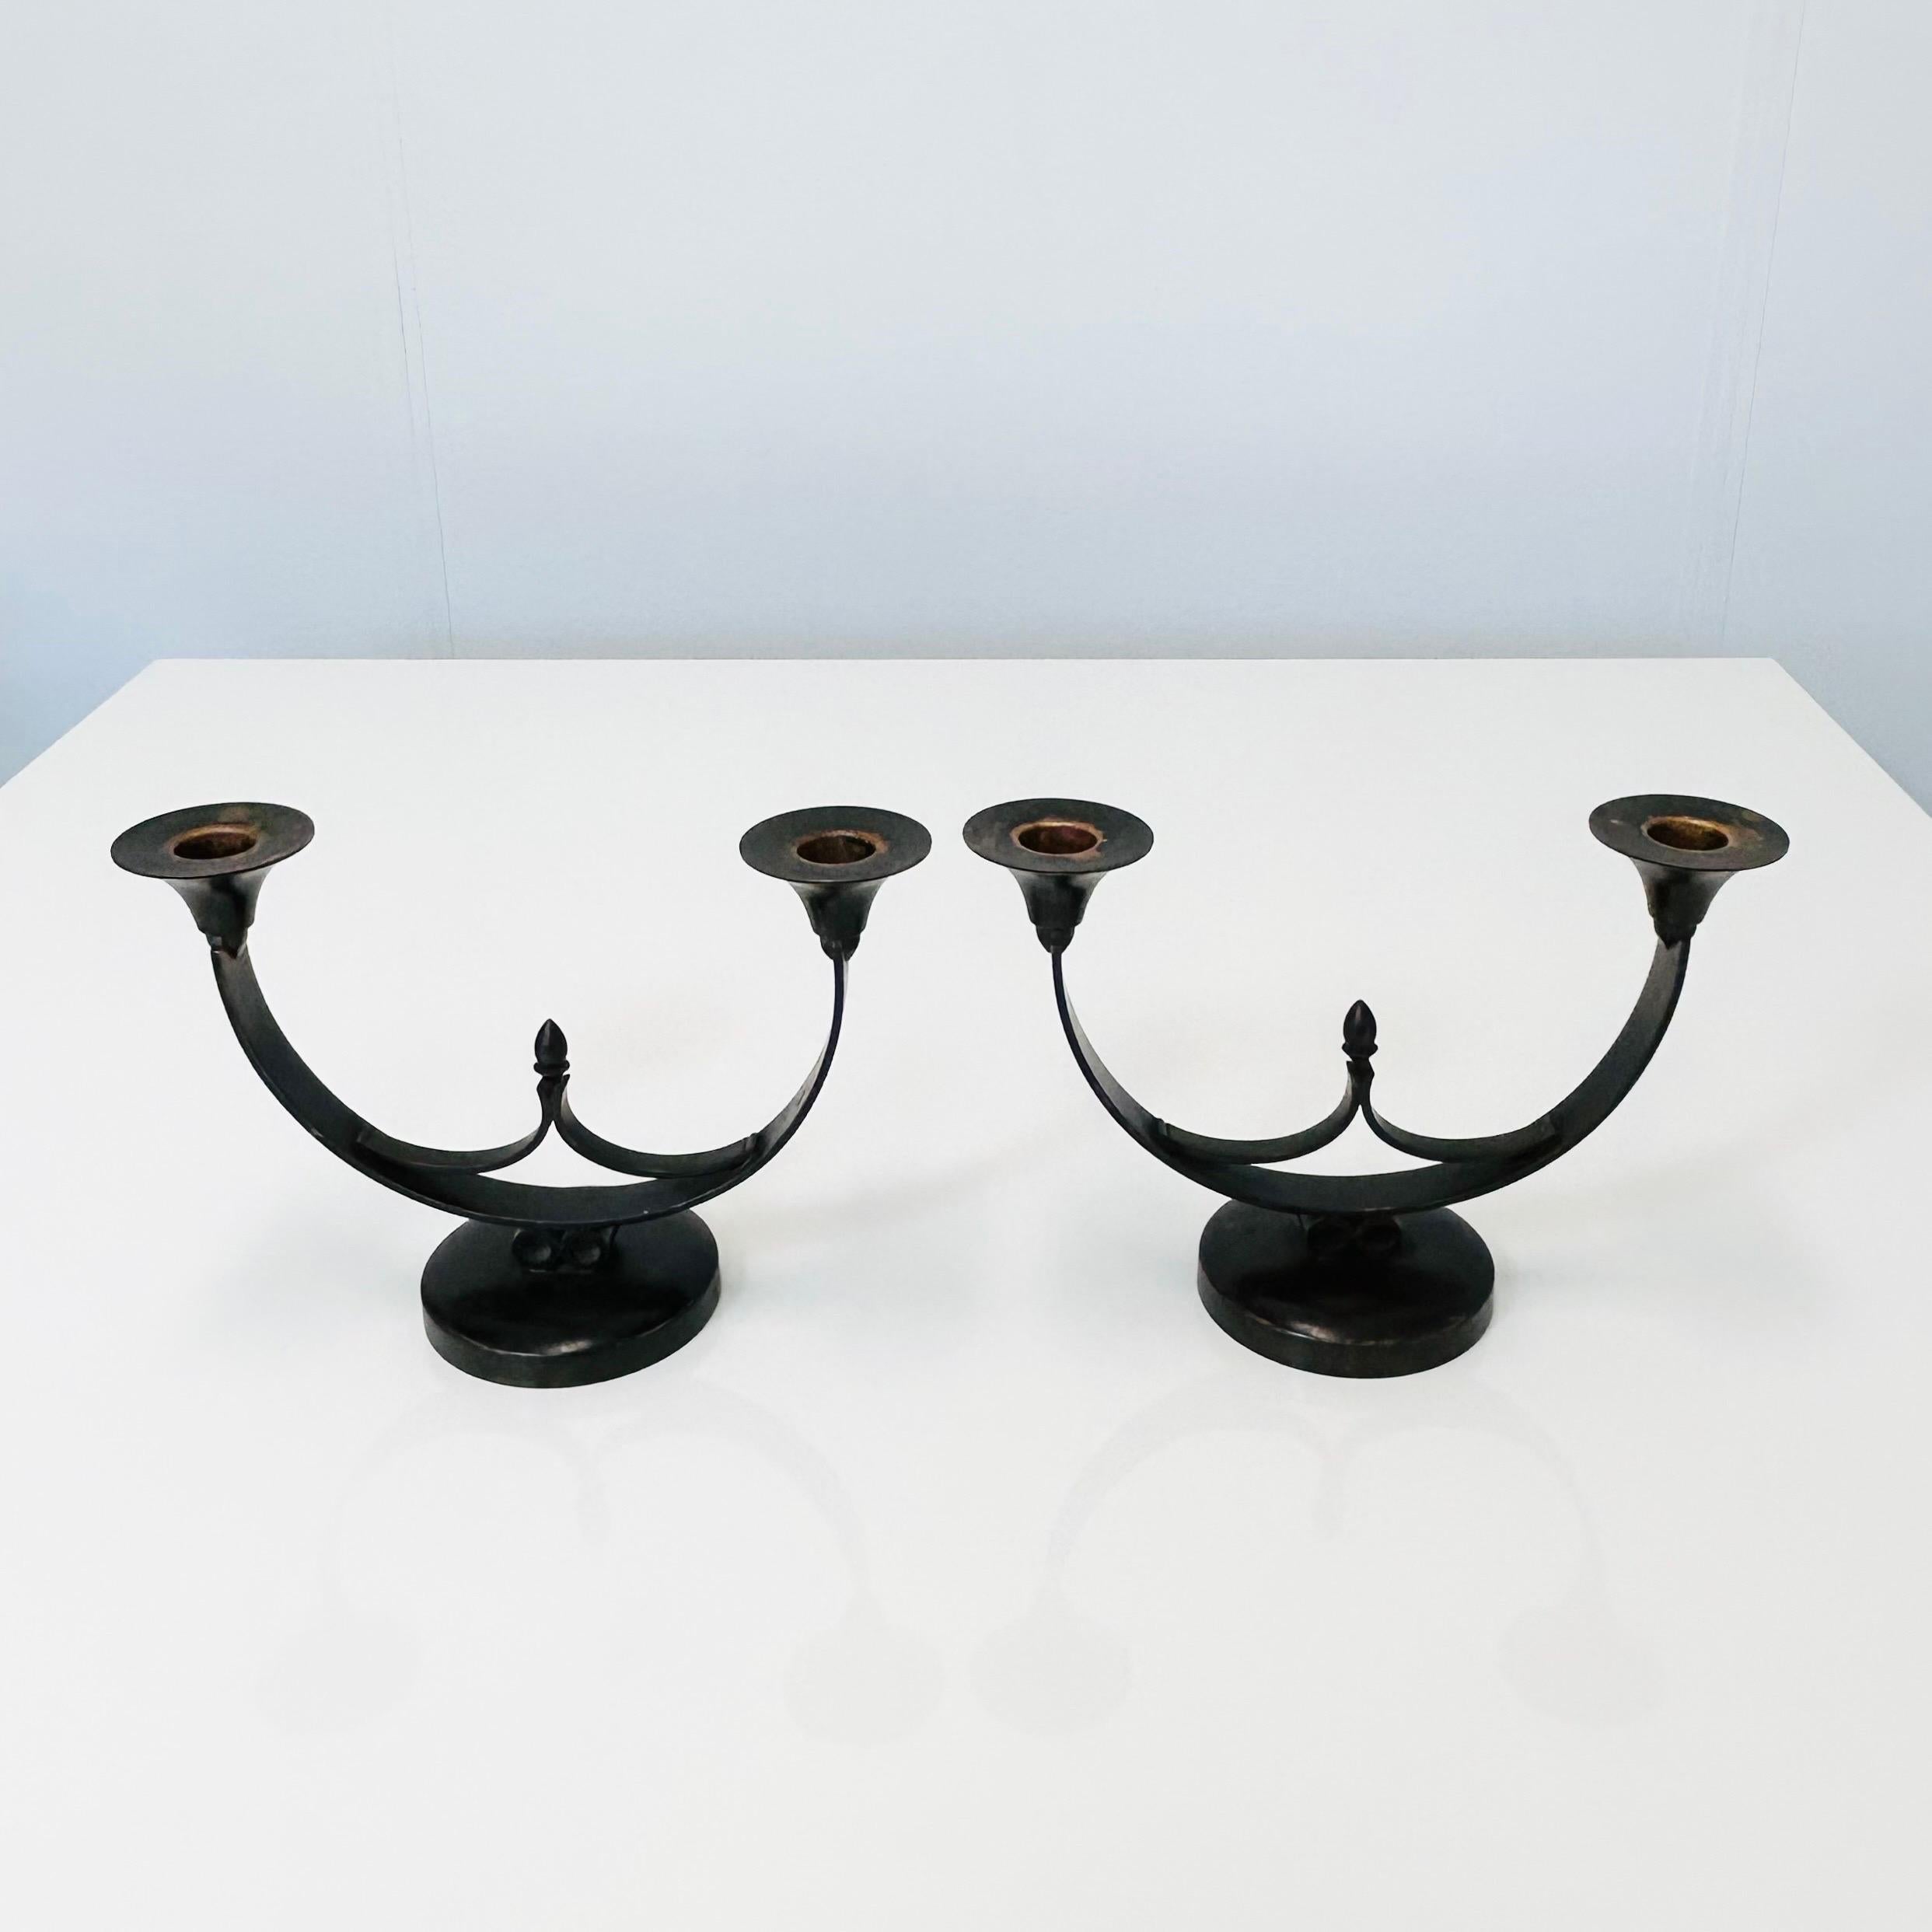 Pair of Light Bronze Candle Holders by Just Andersen, 1930s, Denmark For Sale 2